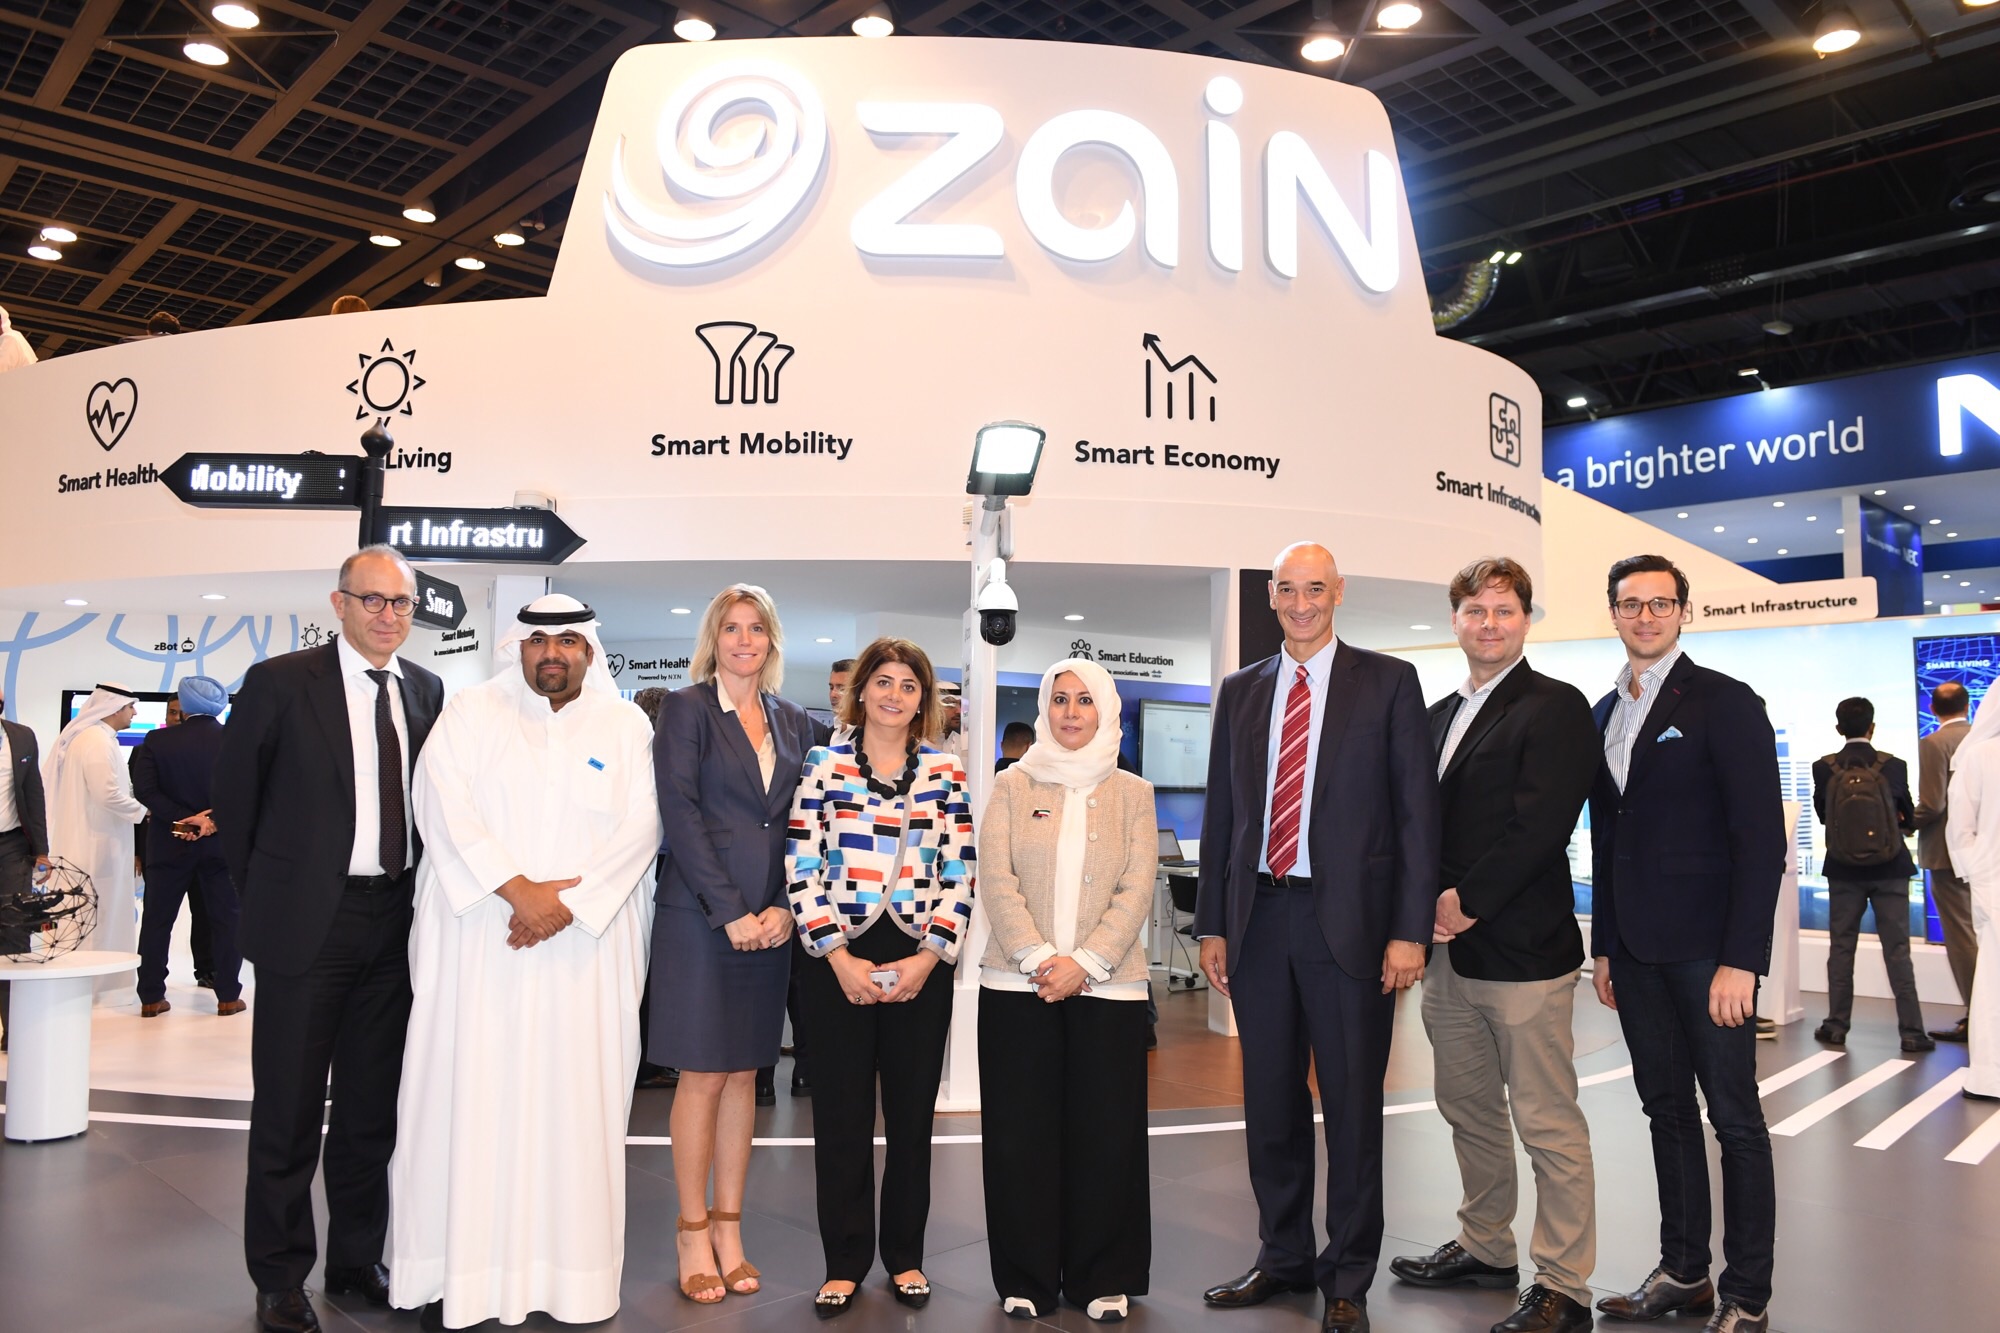 Zain Kuwait, the country’s leading digital service provider, today announced that it has signed a partnership agreement with Microsoft to offer various cloud-based services to large enterprises and small-medium businesses across Kuwait